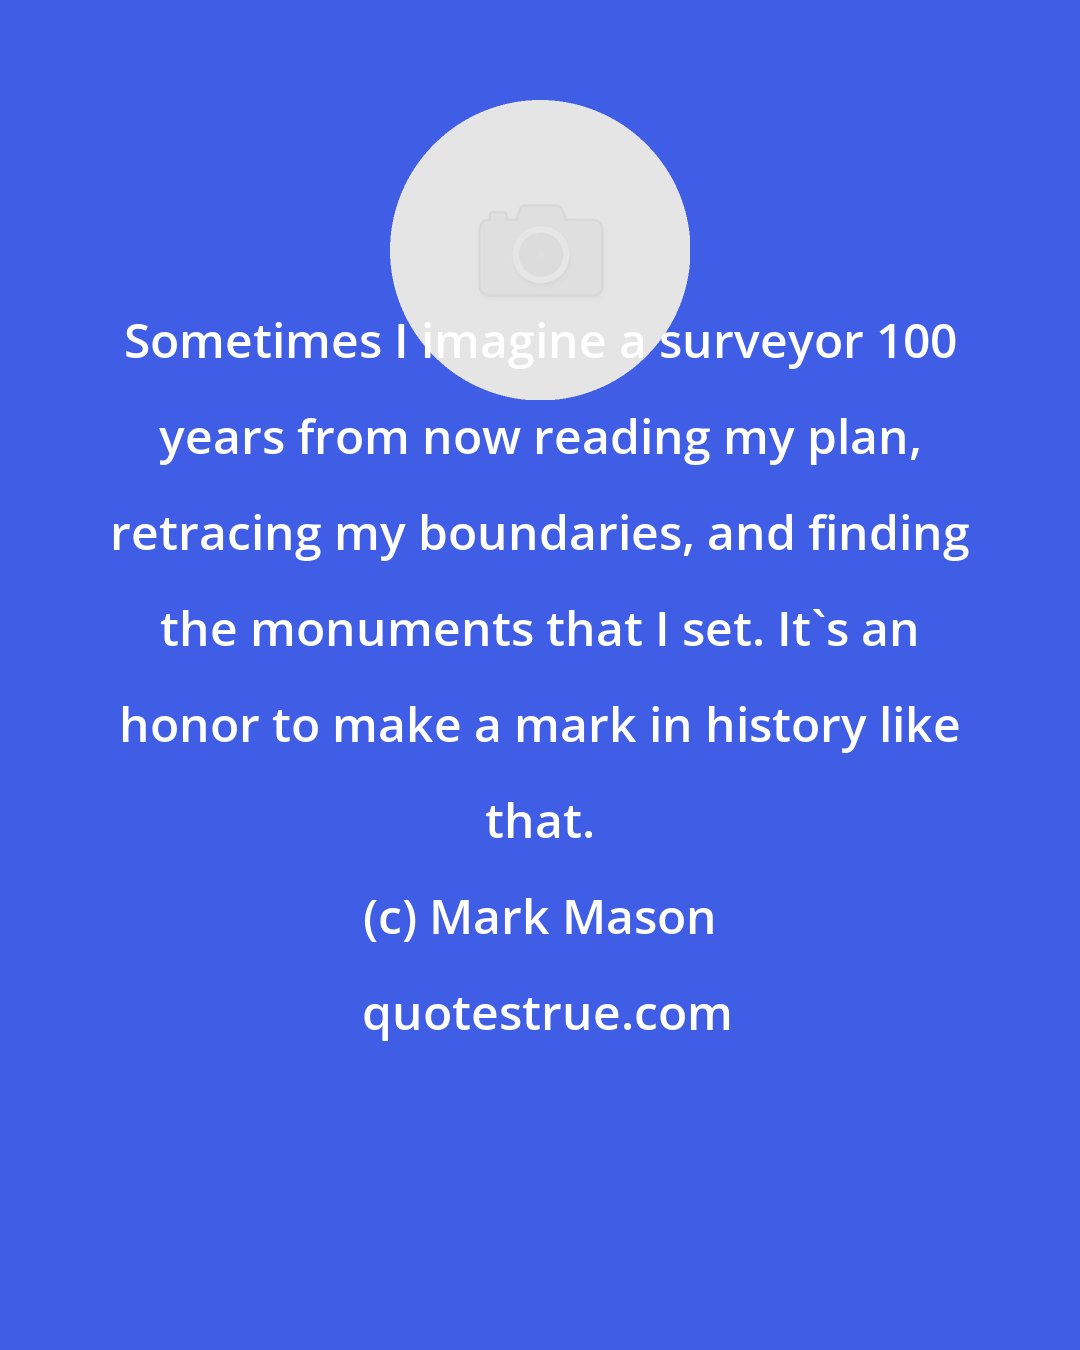 Mark Mason: Sometimes I imagine a surveyor 100 years from now reading my plan, retracing my boundaries, and finding the monuments that I set. It's an honor to make a mark in history like that.